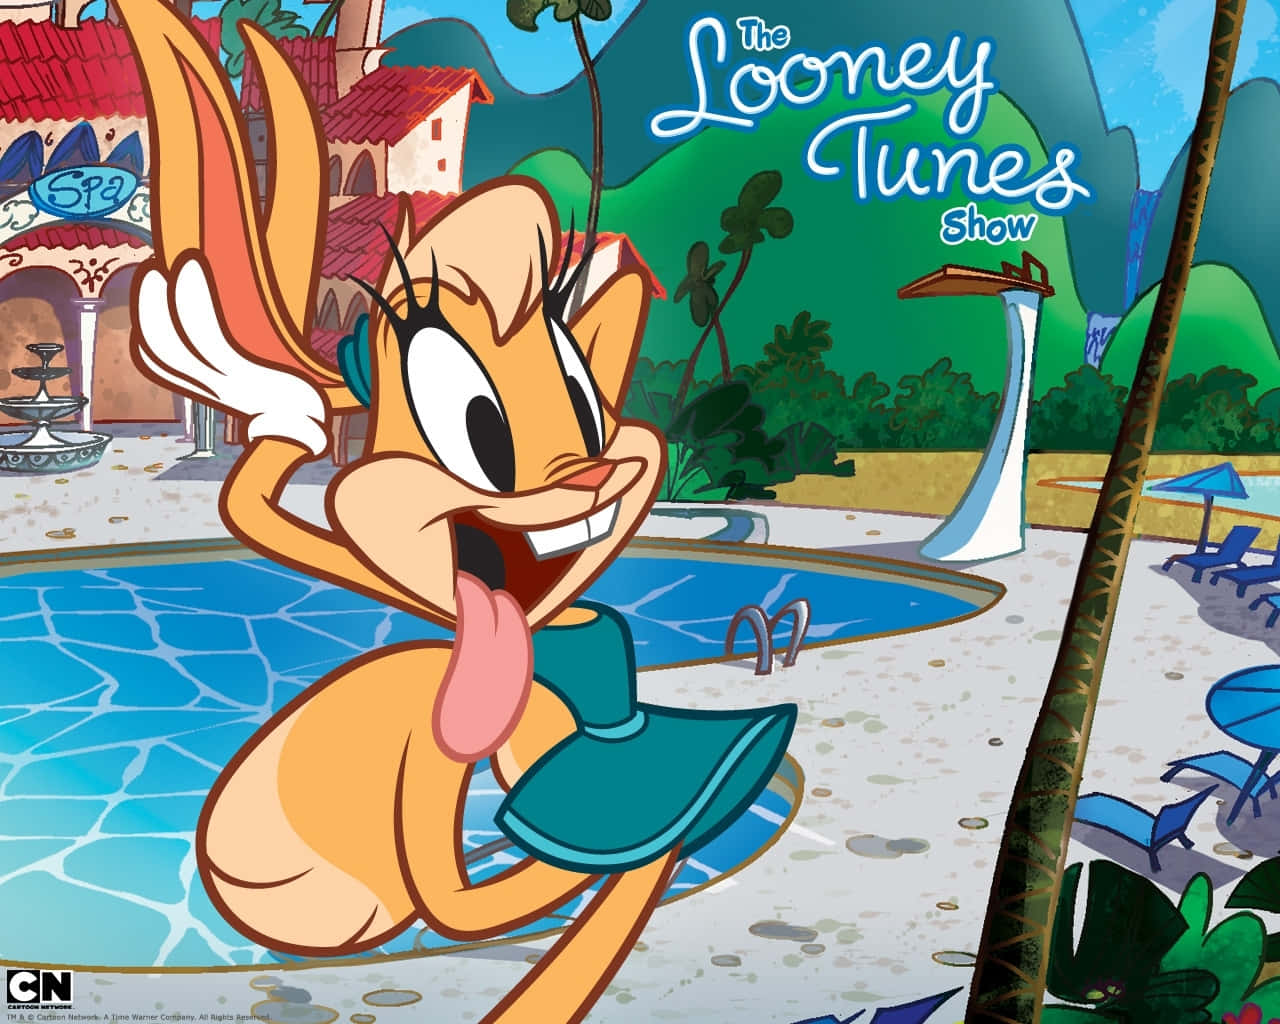 “The Iconic Looney Tunes Characters in All Their Glory!”